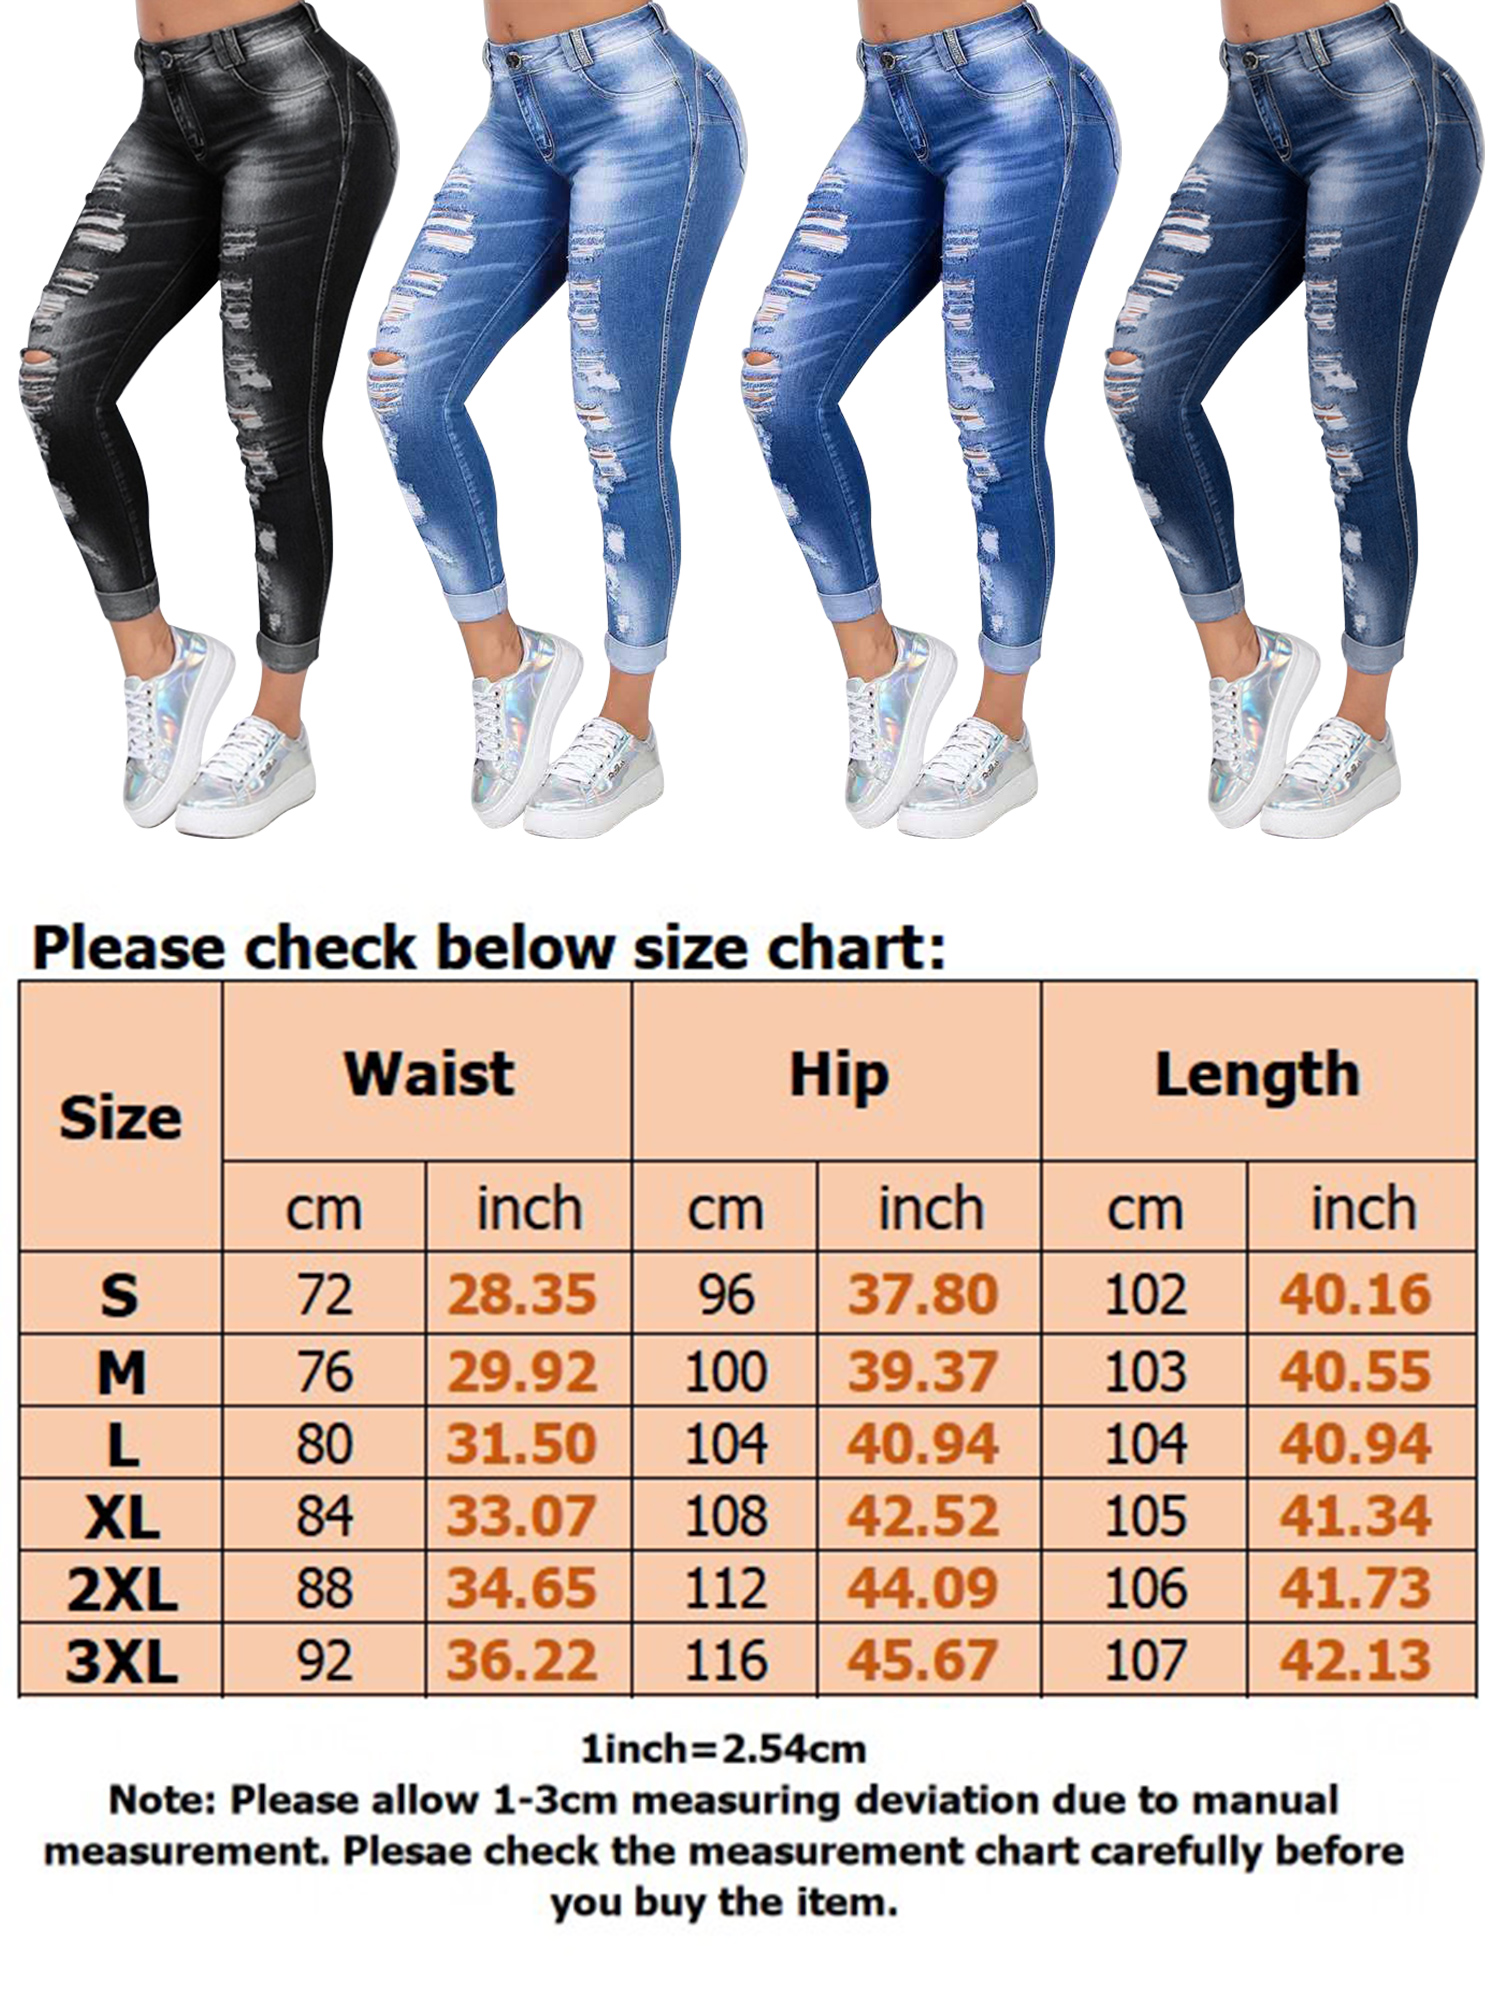 Ripped Distressed Jeans For Women Mid Rise Skinny Slim Fit Jeans Ladies Cut Denim Trouser Pants For Juniors - image 2 of 2